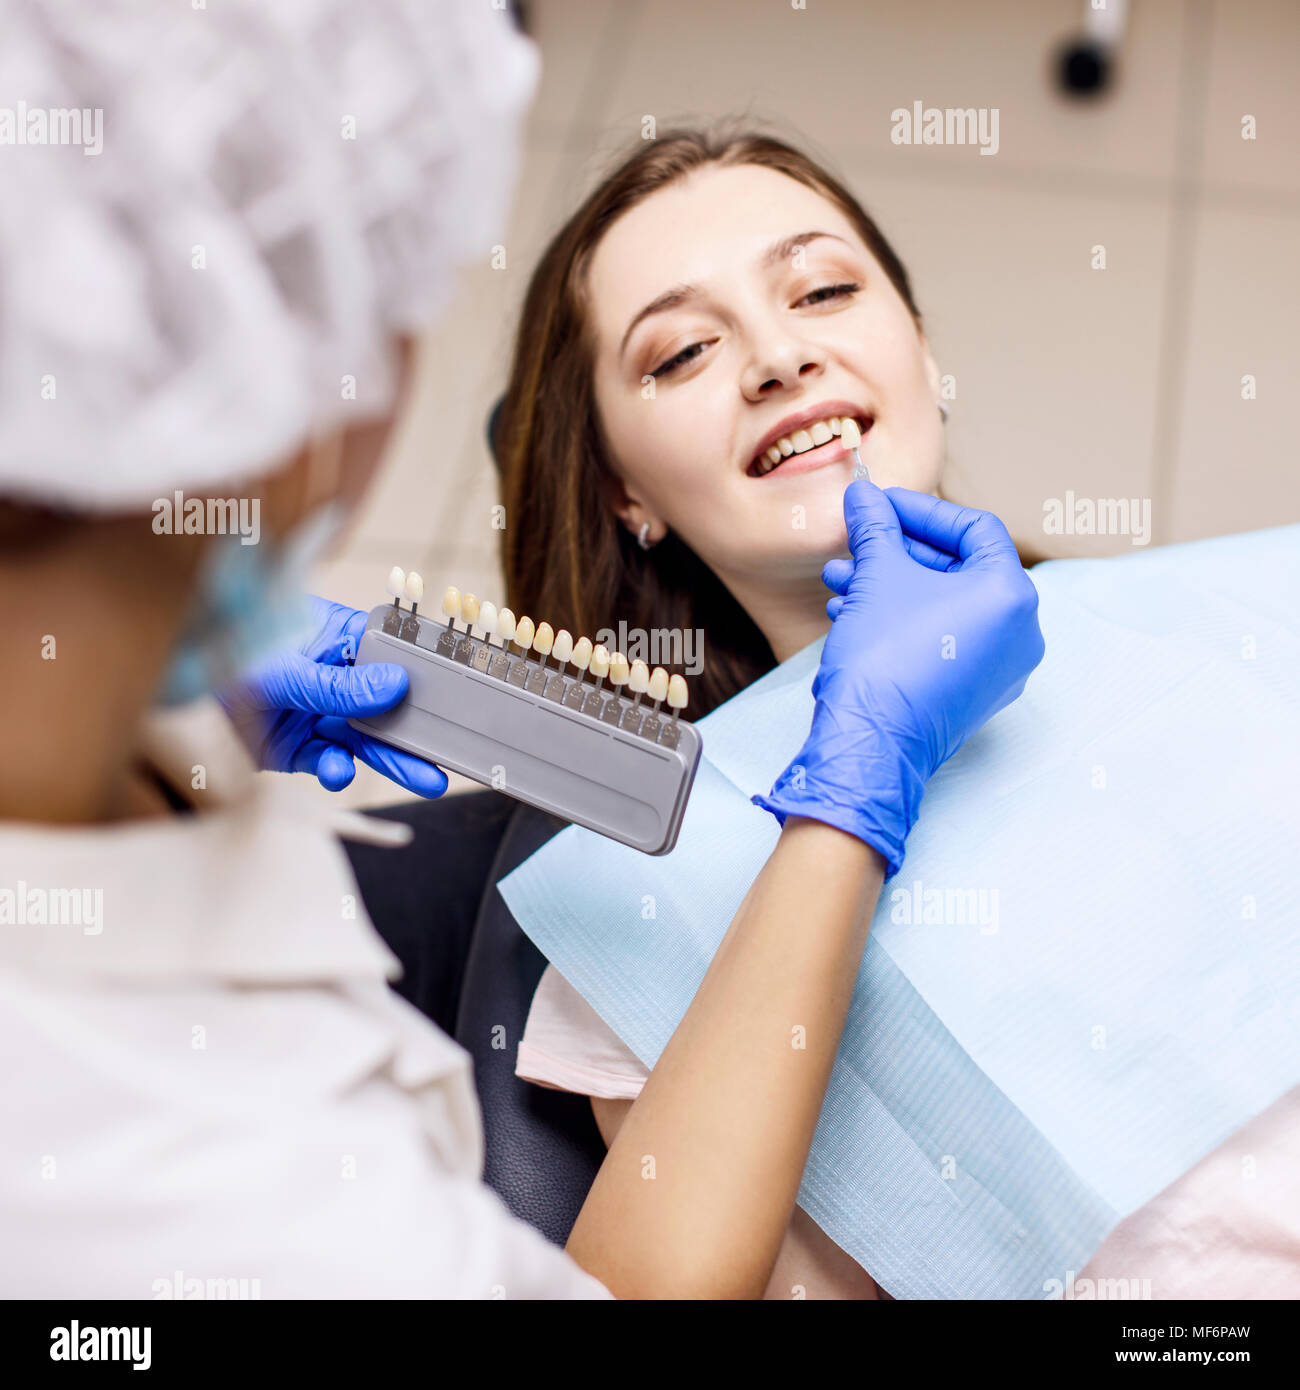 Patient's teeth shade with samples for bleaching treatment. Stock Photo